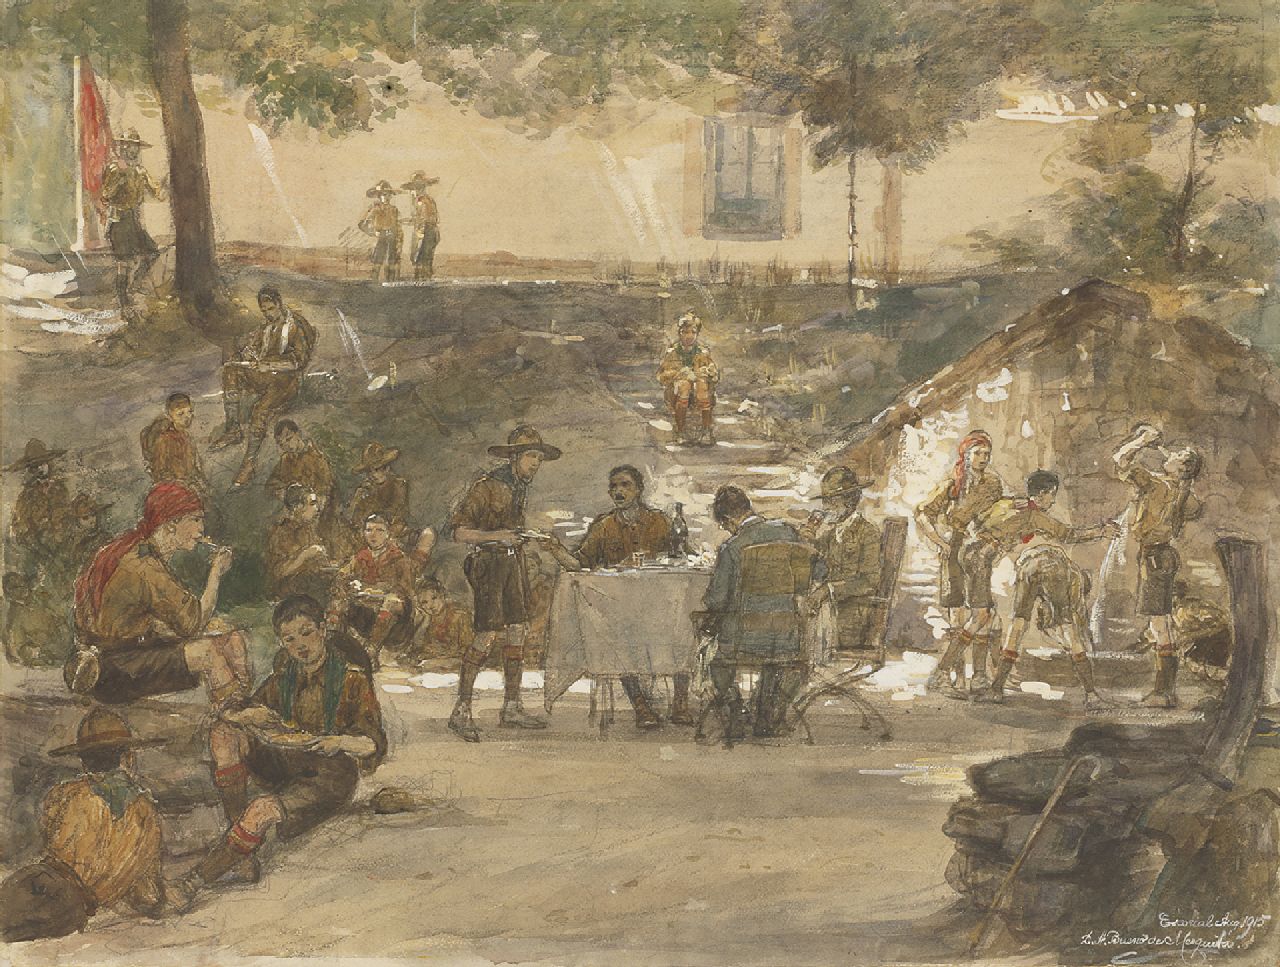 Bueno de Mesquita D.A.  | David Abraham Bueno de Mesquita | Watercolours and drawings offered for sale | Boy scouts at the Escorial, Spain, black chalk and watercolour on paper 47.5 x 63.0 cm, signed l.r. and dated 'Escorial' Aug 1915